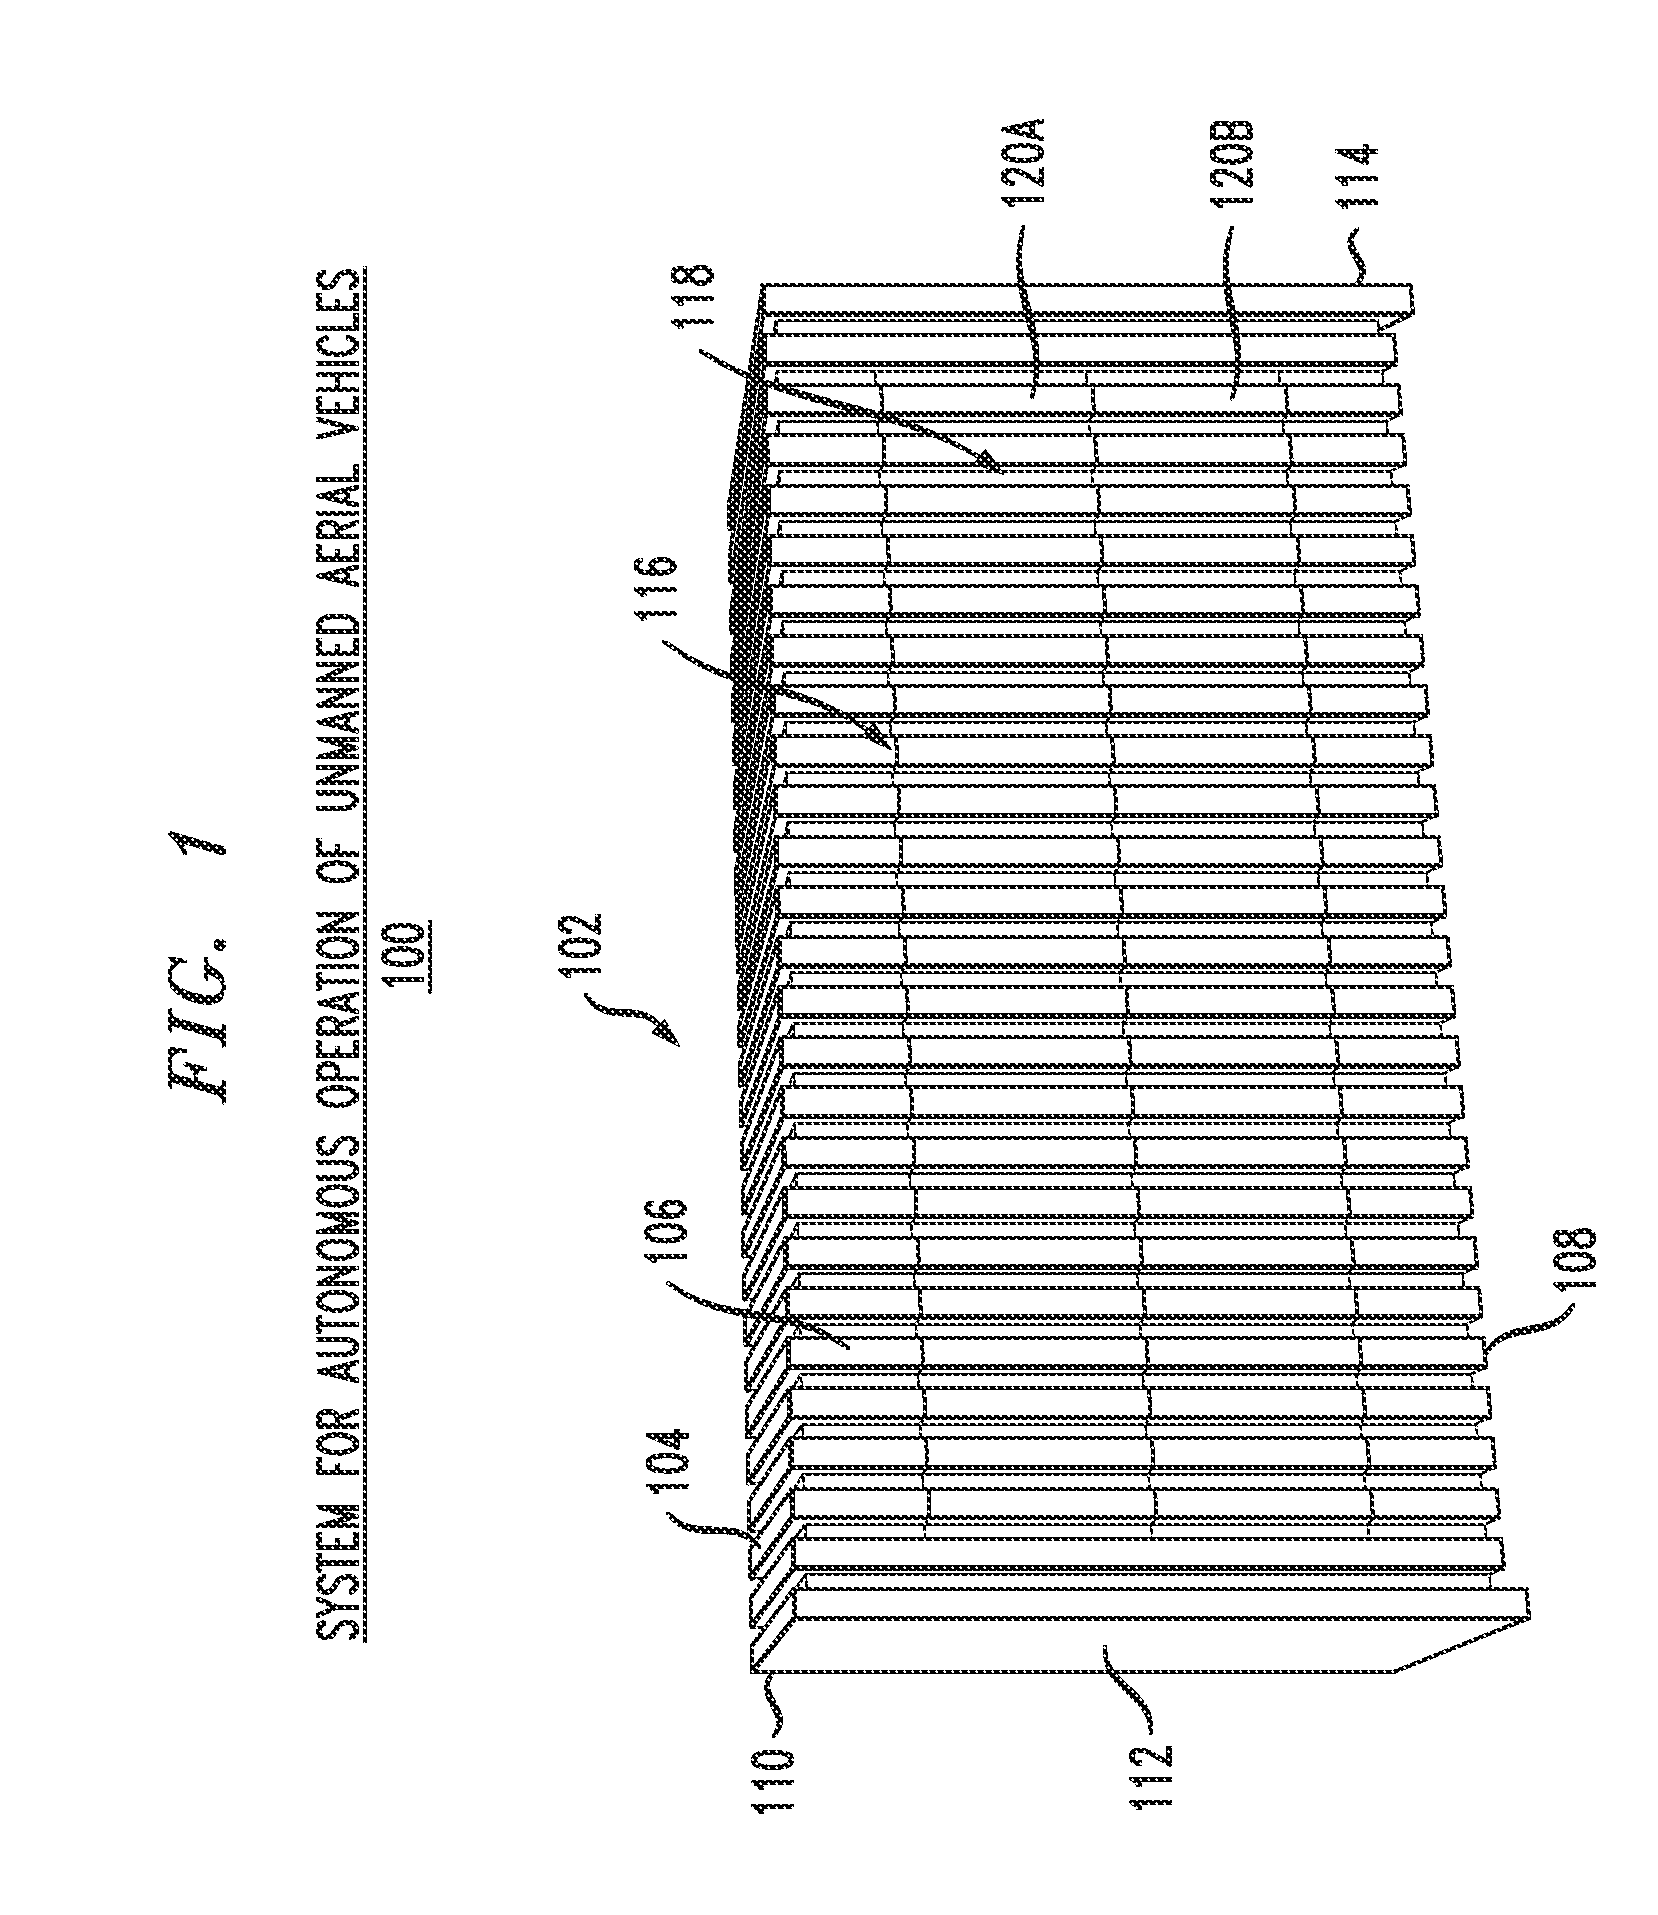 Systems and Methods for Autonomous Operations of Unmanned Aerial Vehicles